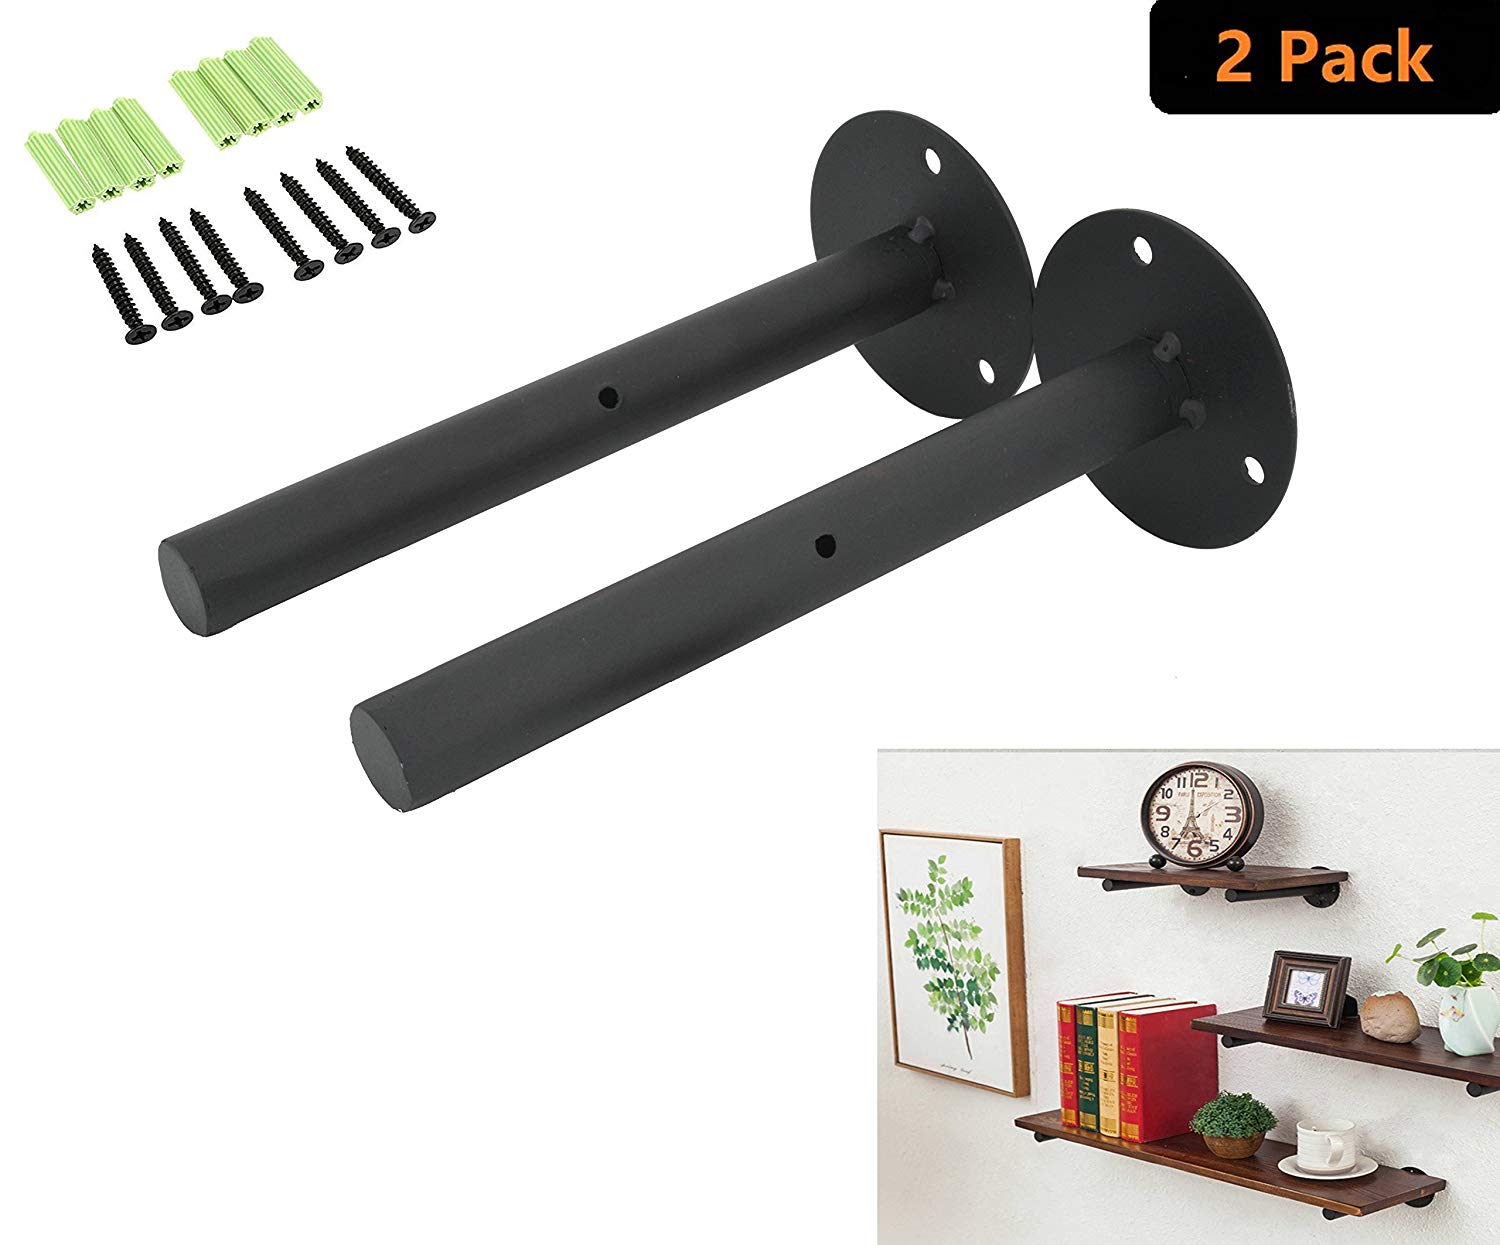 industrial addgrace black floating shelf brackets retro wall mounted supports includes screws anchors round inch home garage organisation microwave bunnings kitchen storage